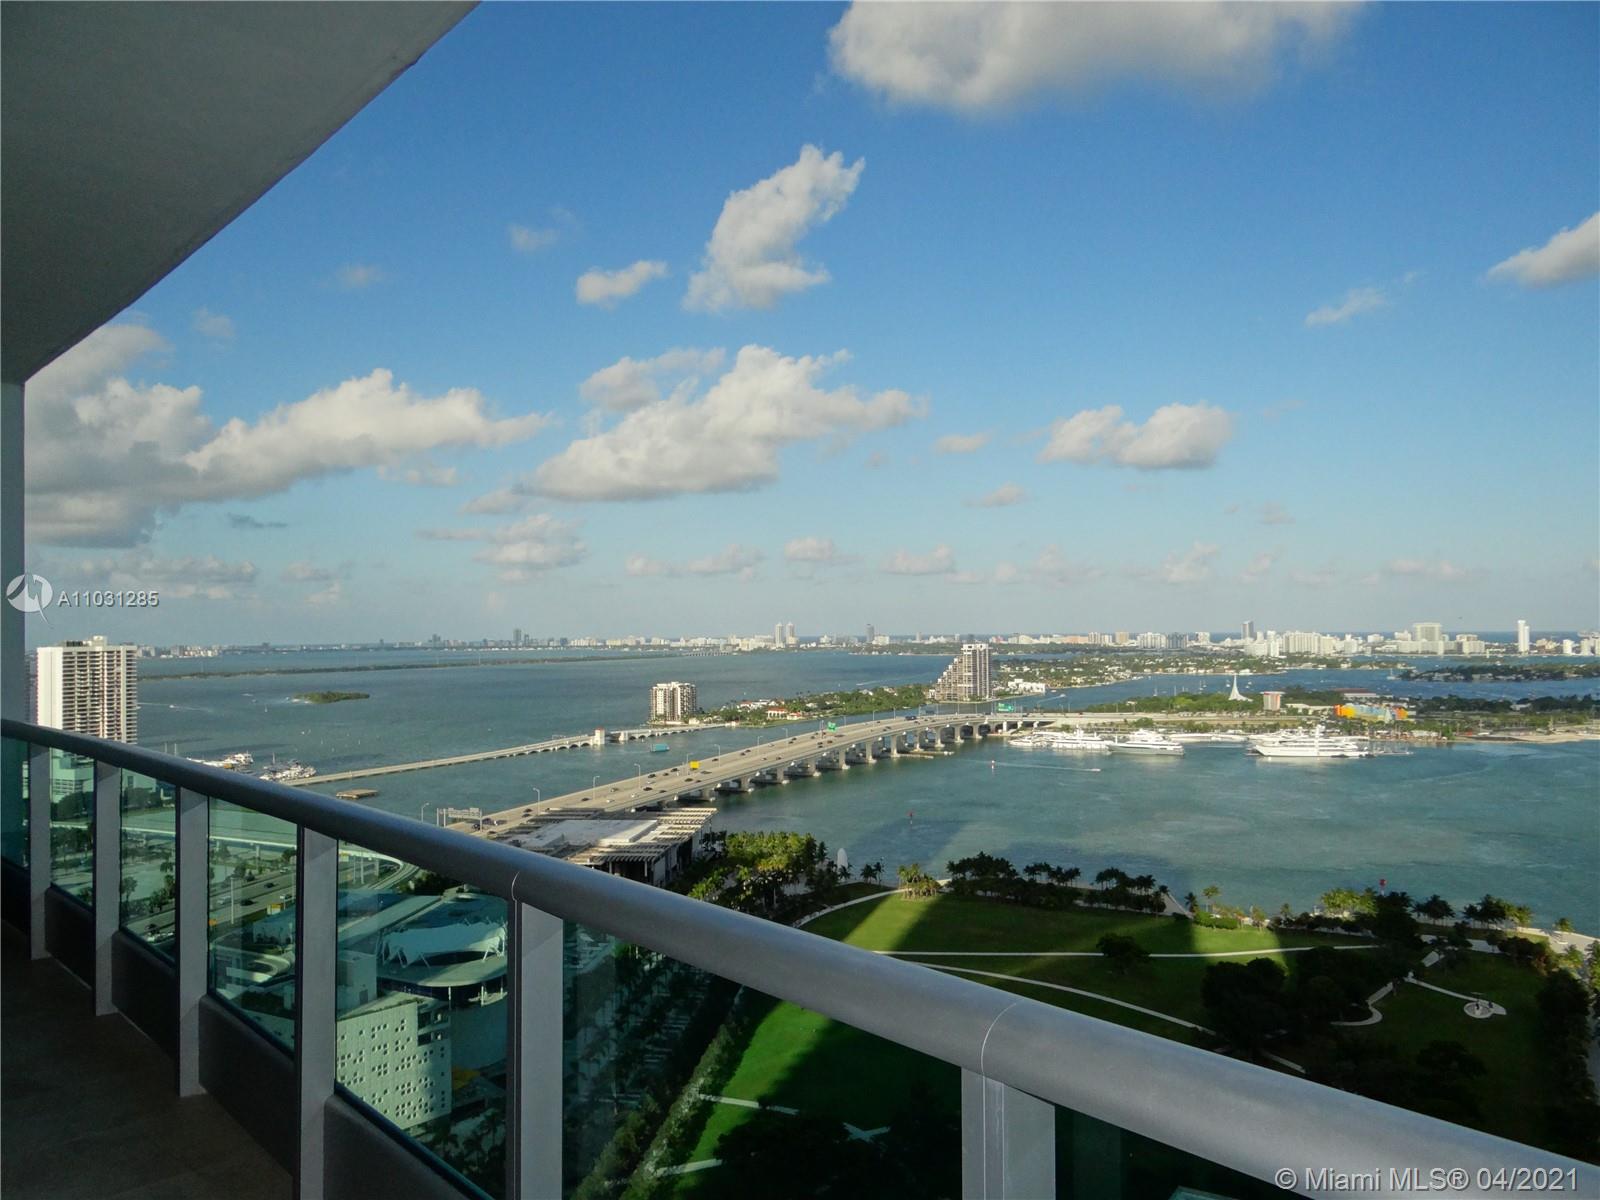 Photo 1 of 900 Biscayne Bay Apt 3403 in Miami - MLS A11031285